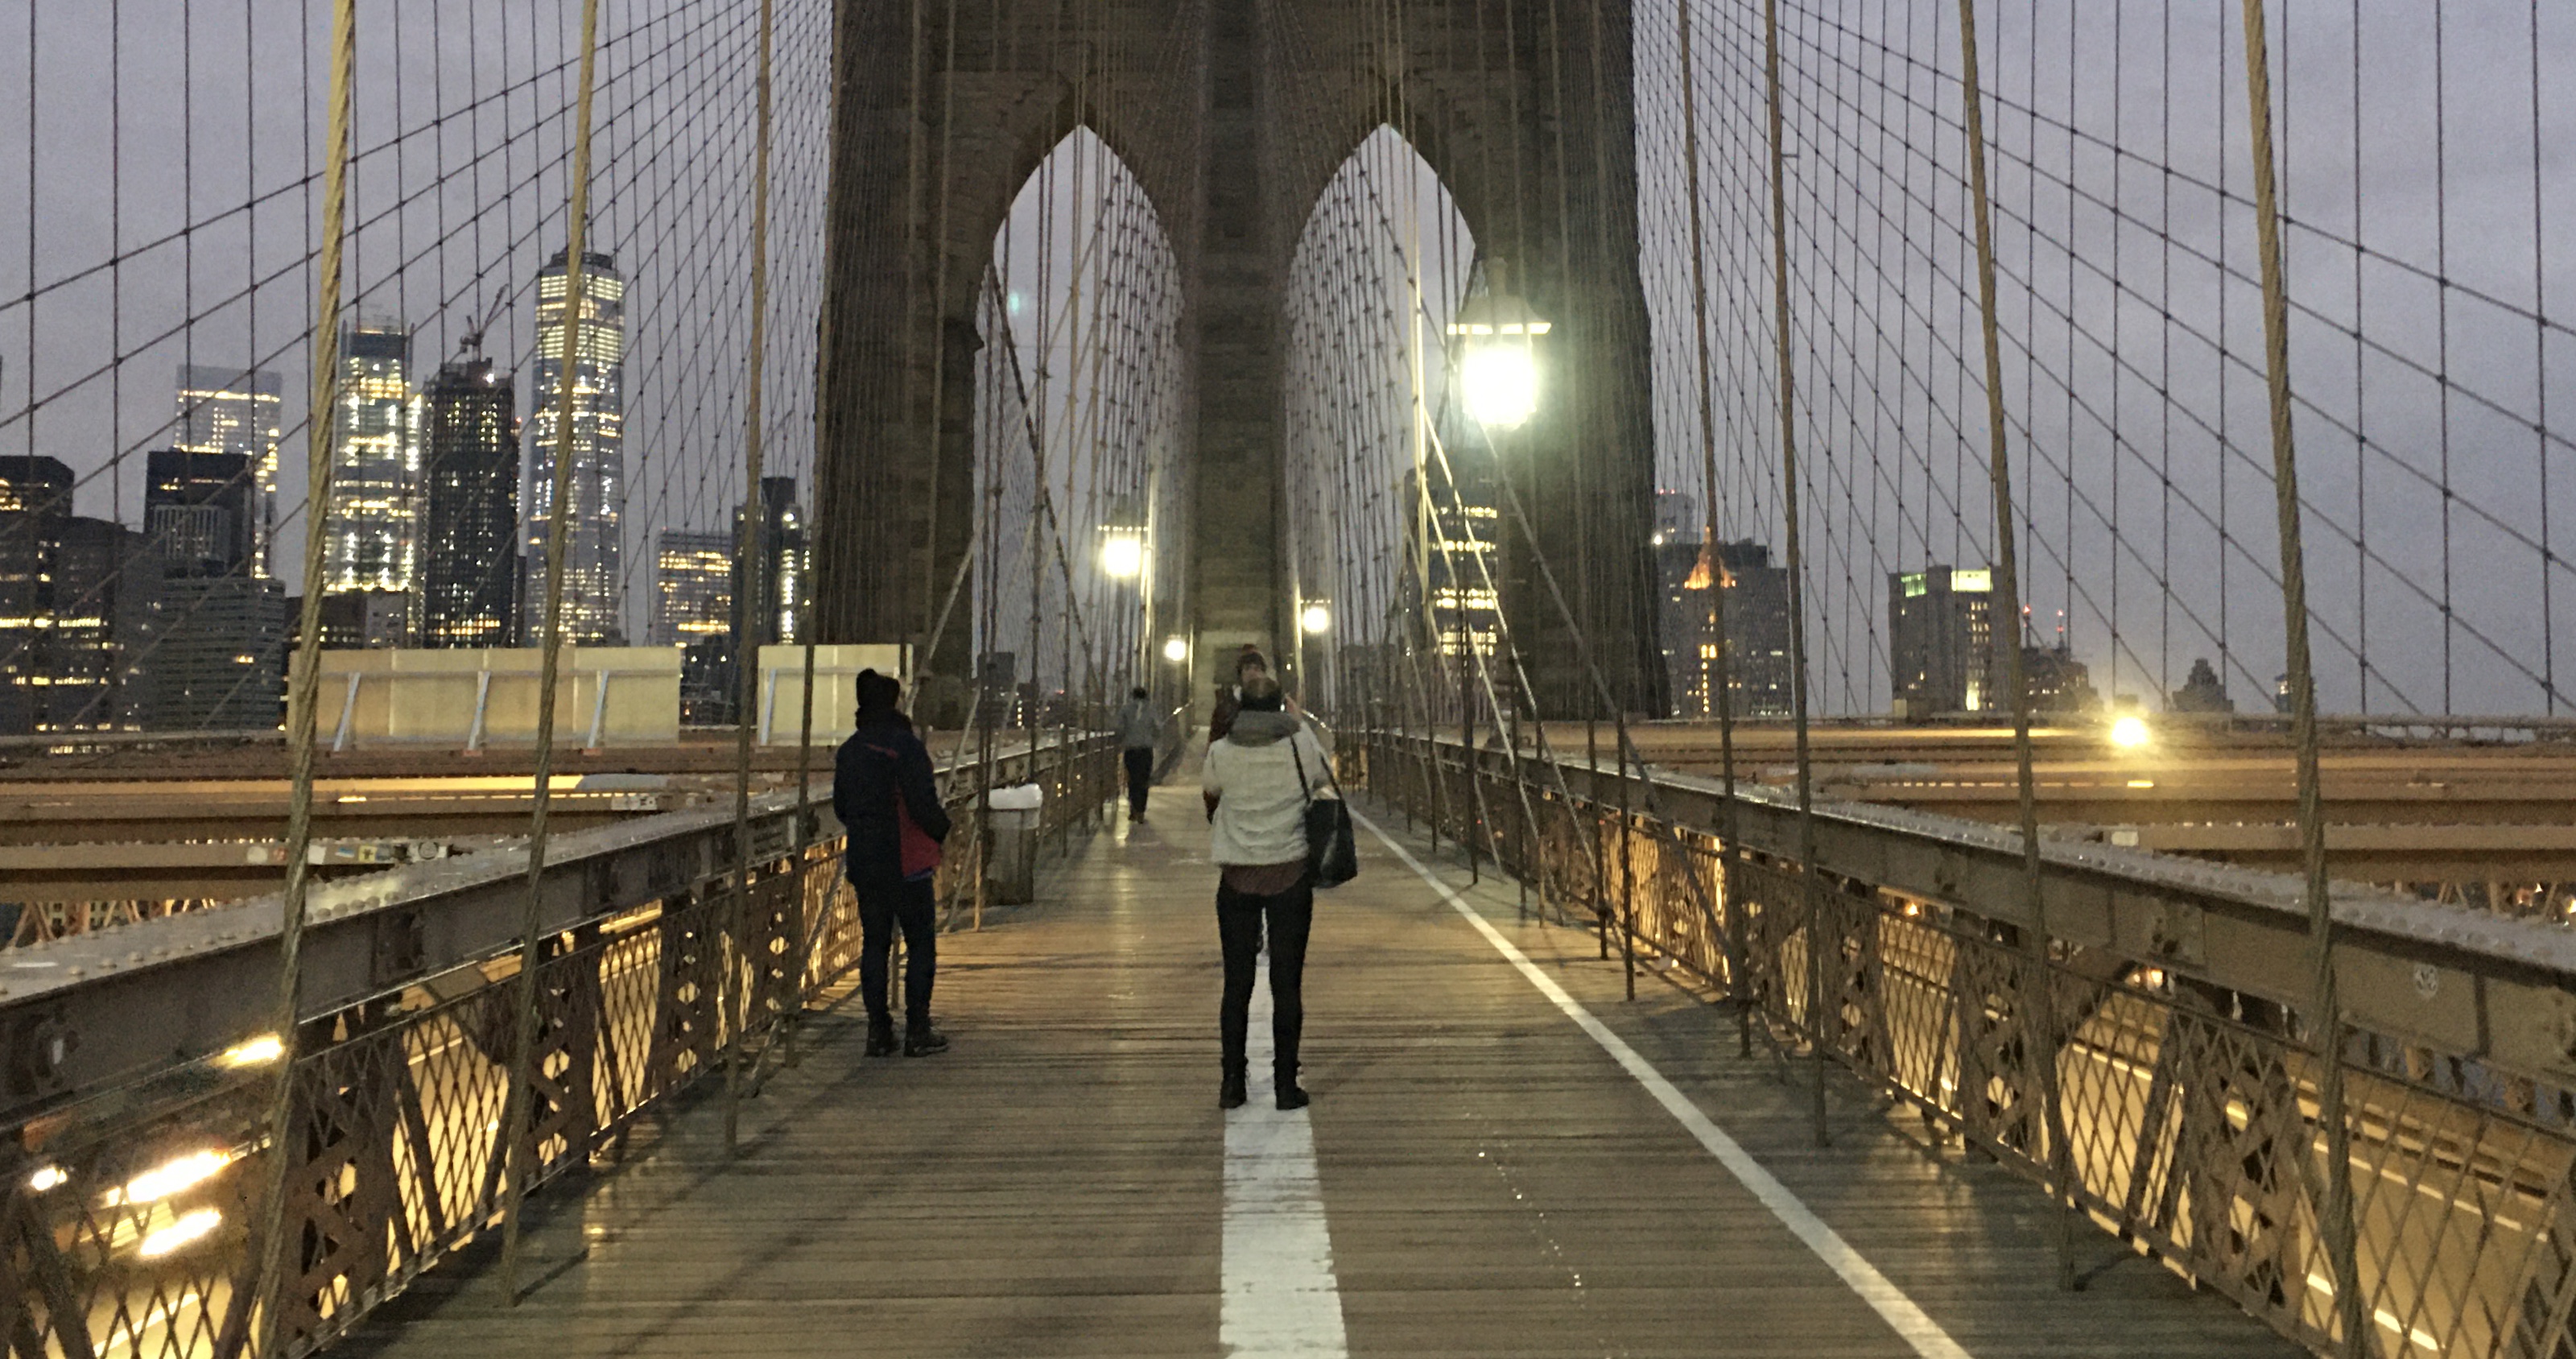 If you get to the Brooklyn Bridge before dawn, you can still take decent photos thanks to the lights on the bridge. Photo: Lore Croghan/Brooklyn Eagle